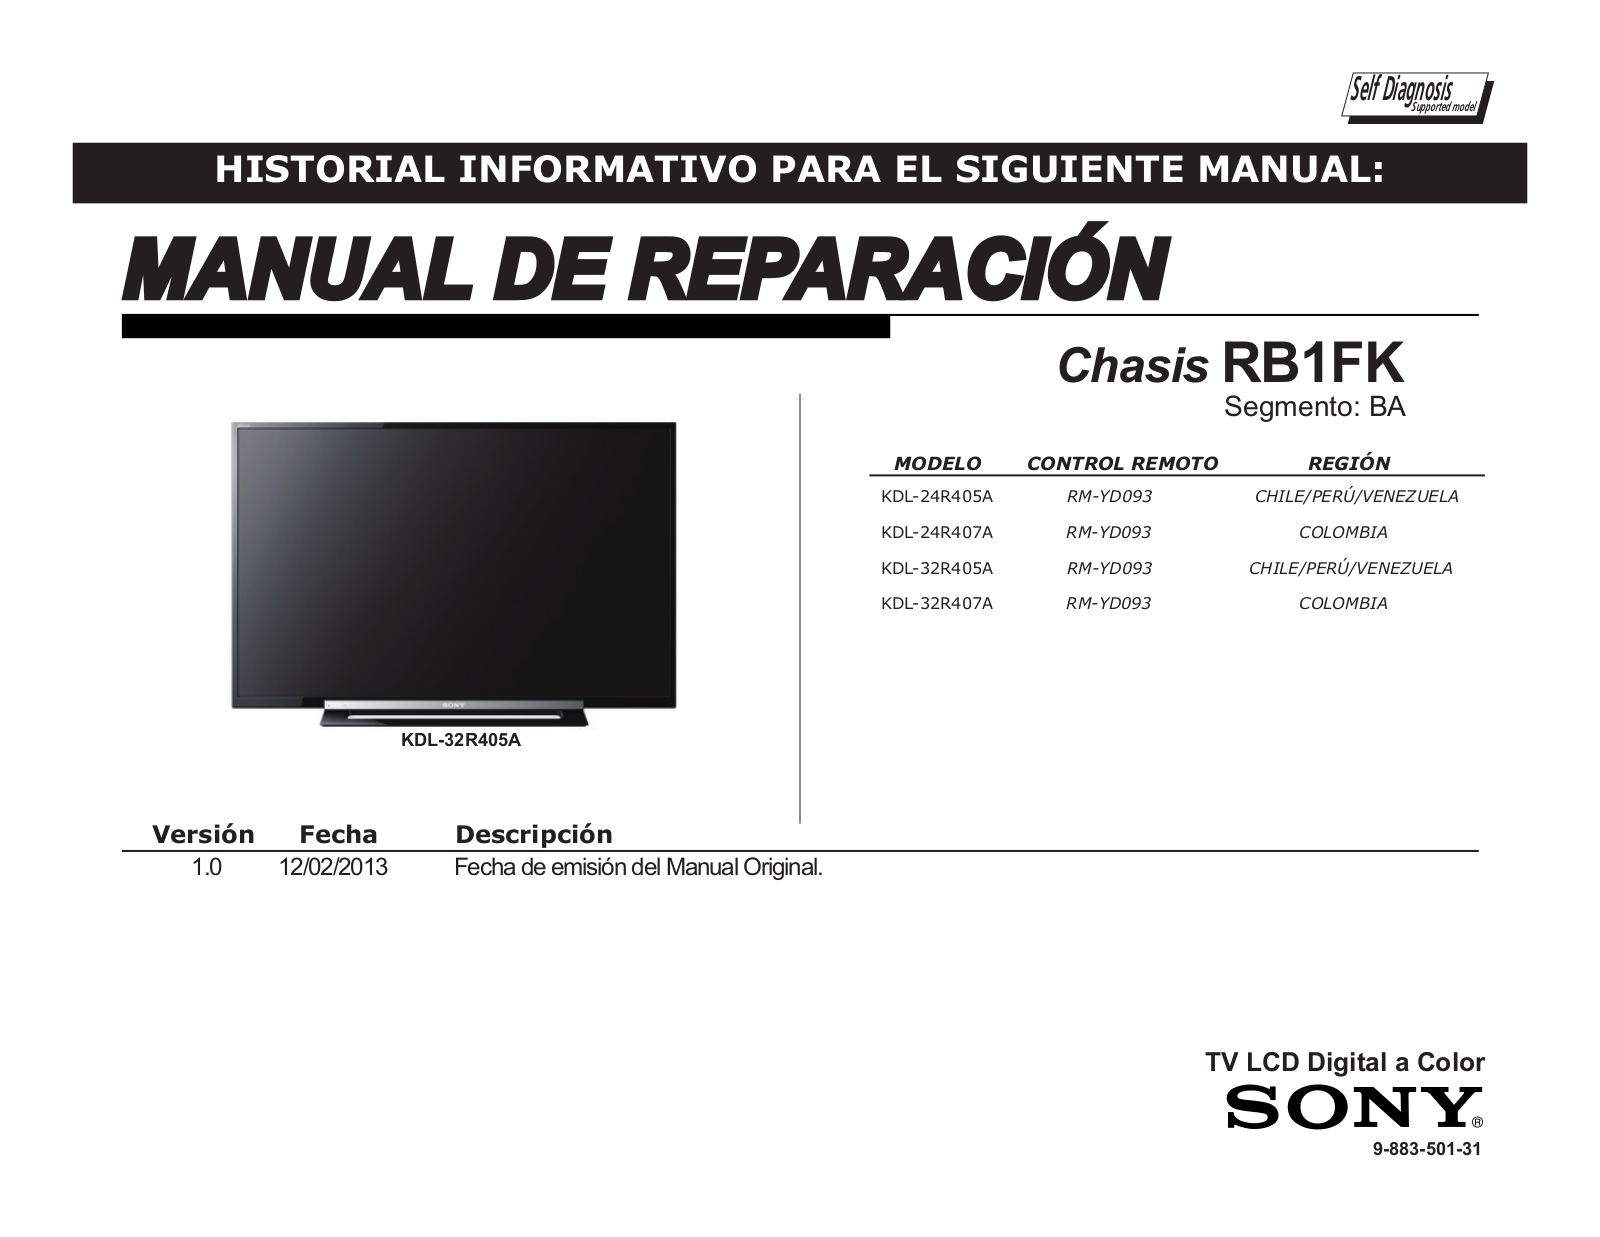 Sony KDL-32R405A, KDL-32R407A Schematic